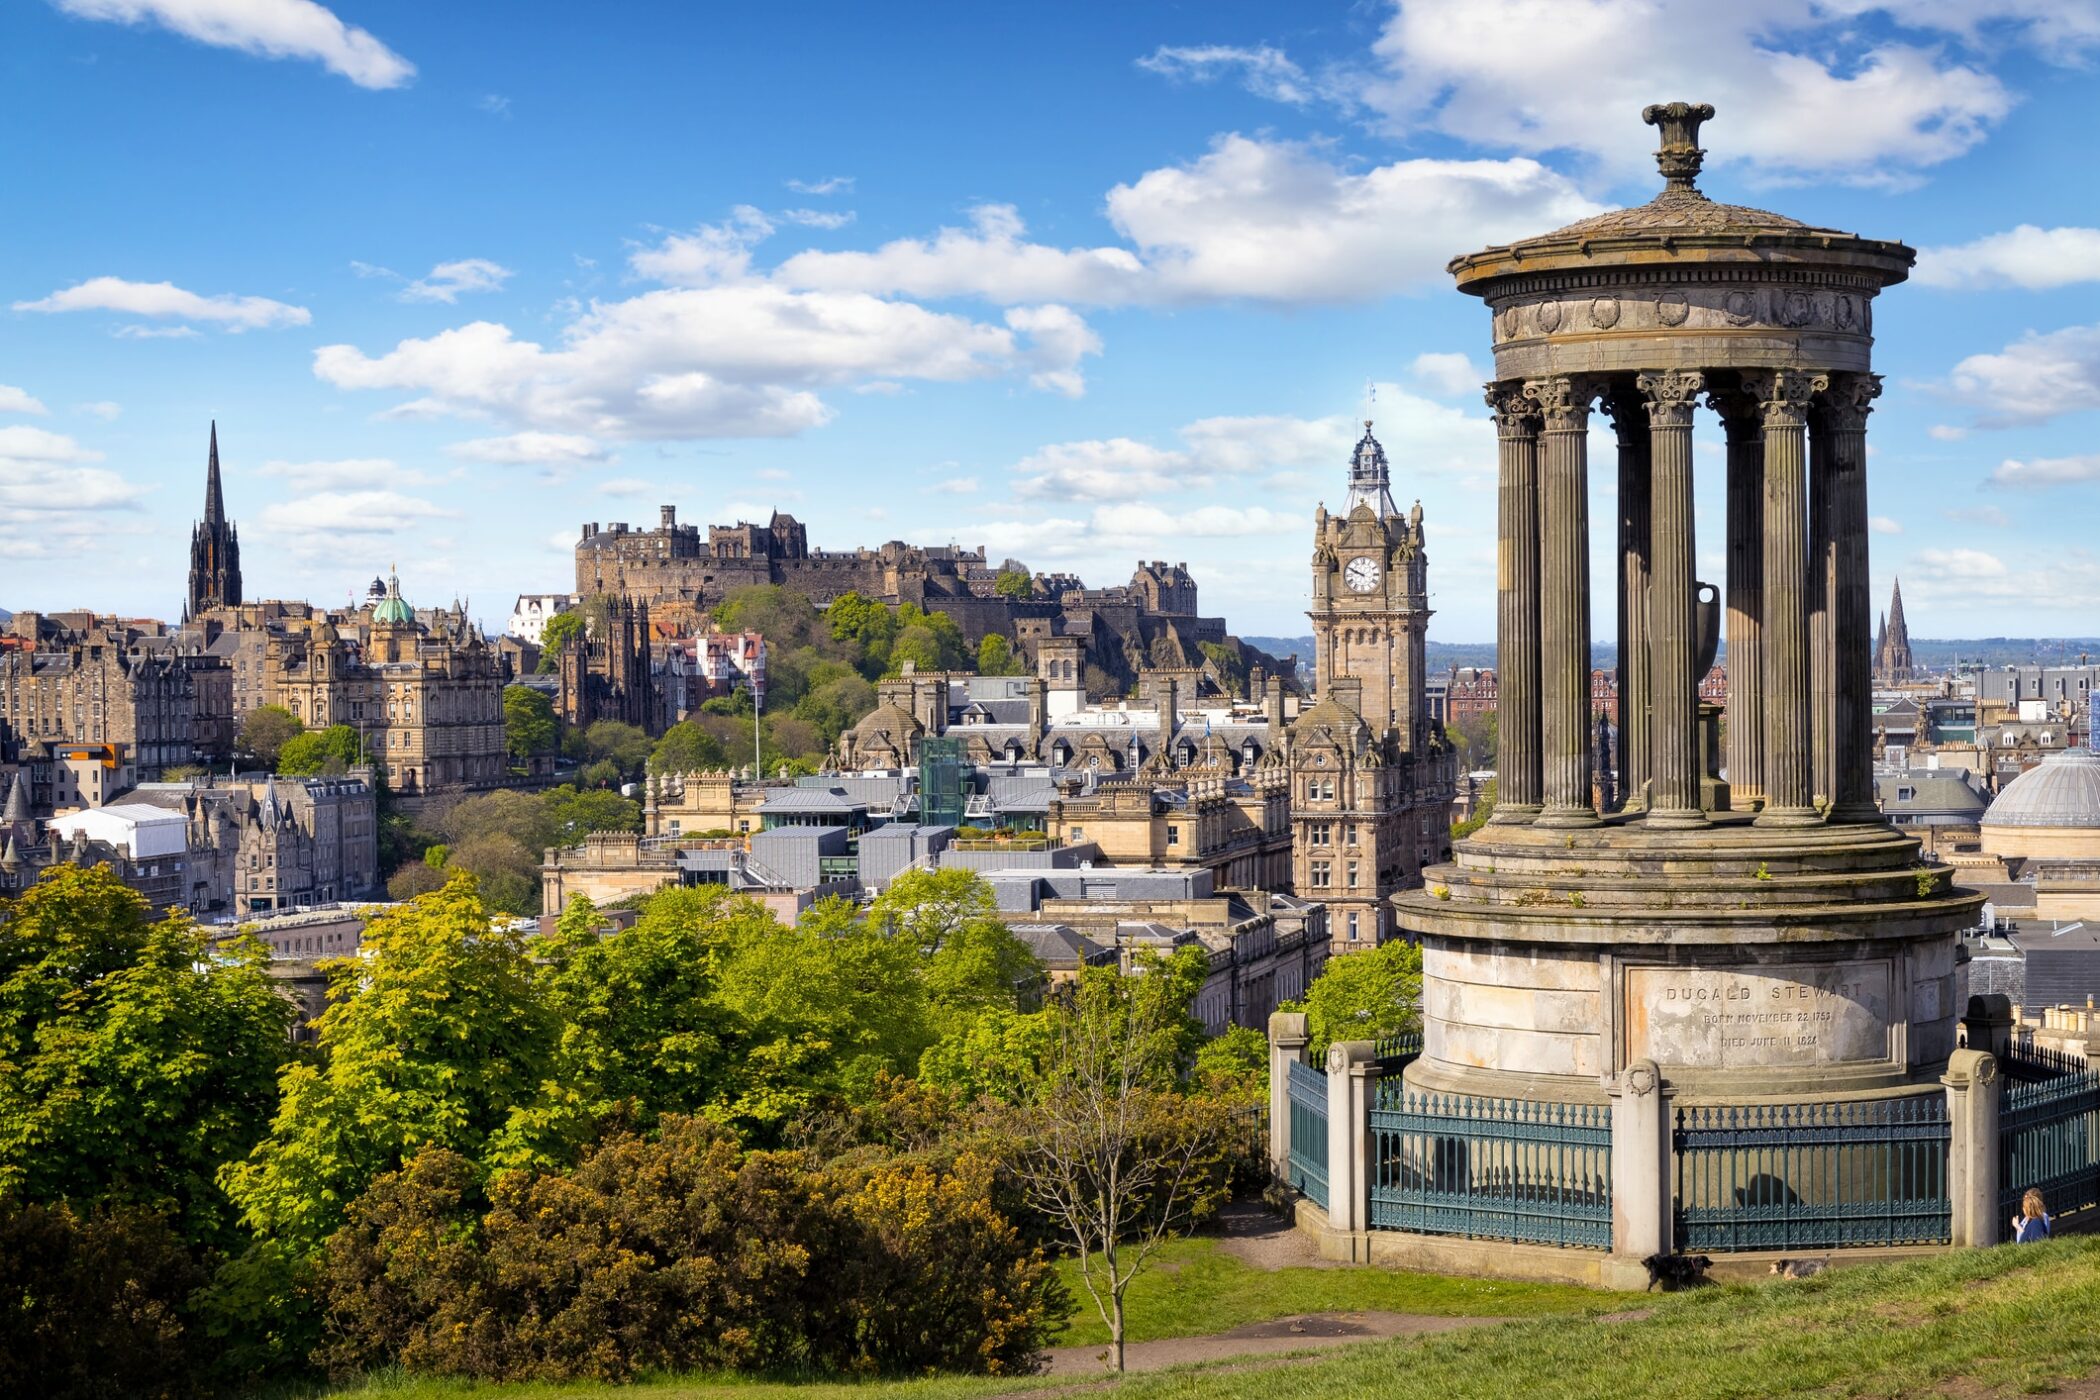 Dugald Stewart Monument and view over historic Edinburgh from Calton Hill, Scotland, UK